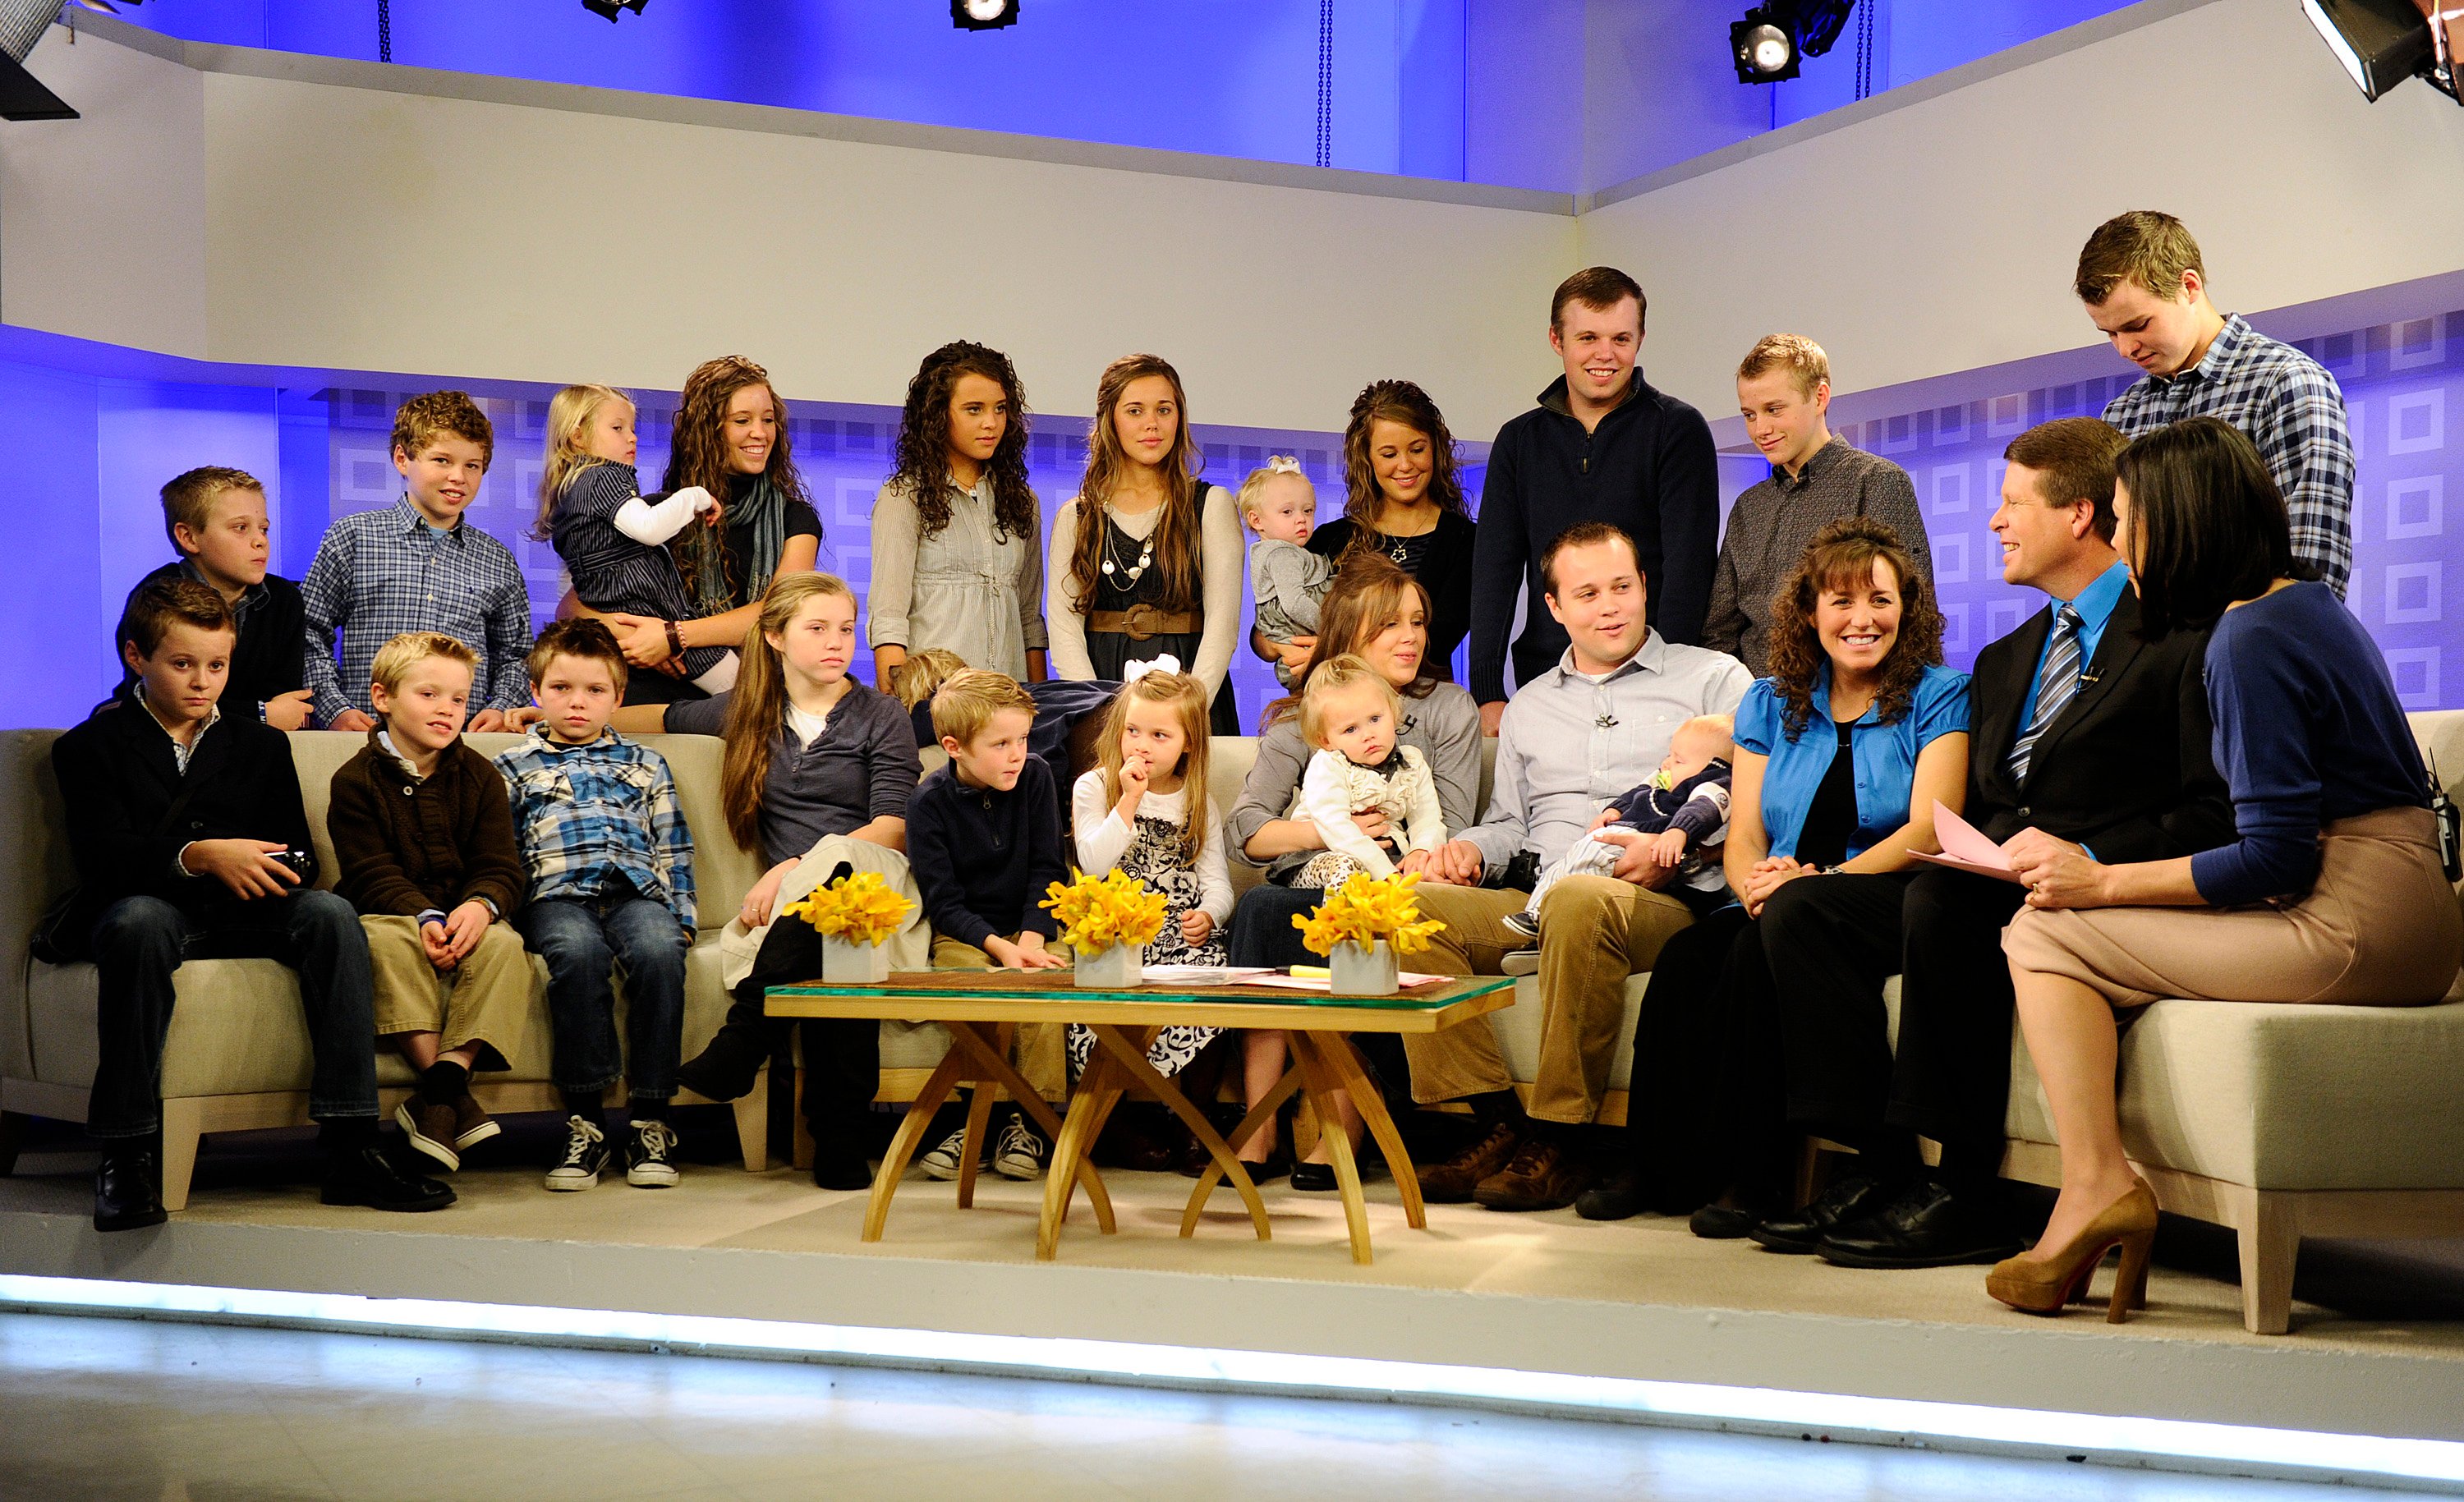 Members of the Duggar family on the Today show 